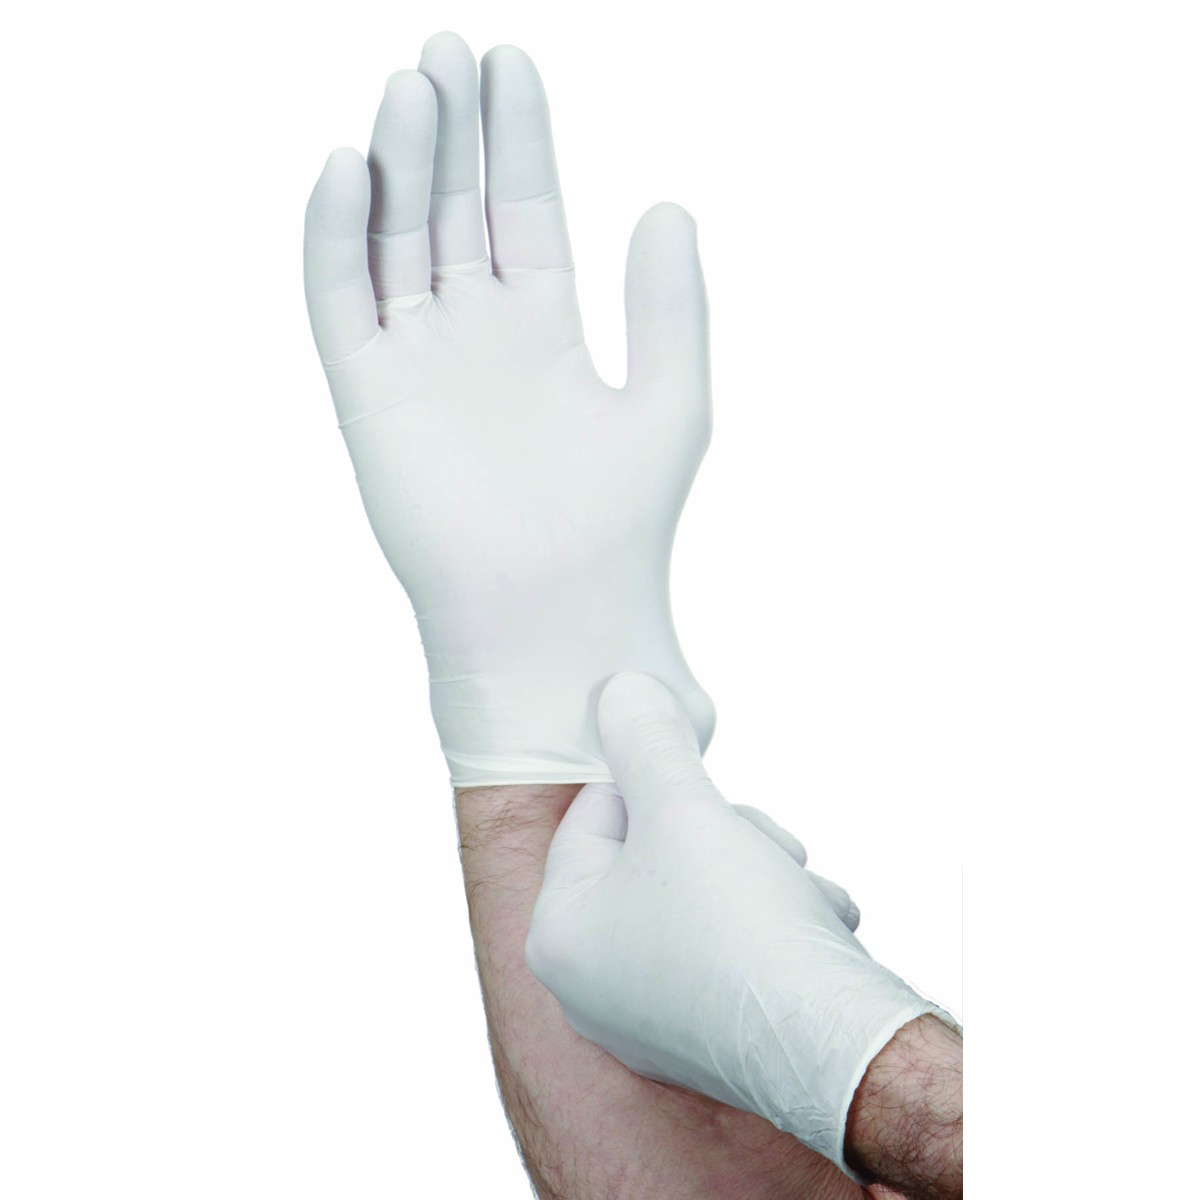 Are you wearing the correct safety gloves?